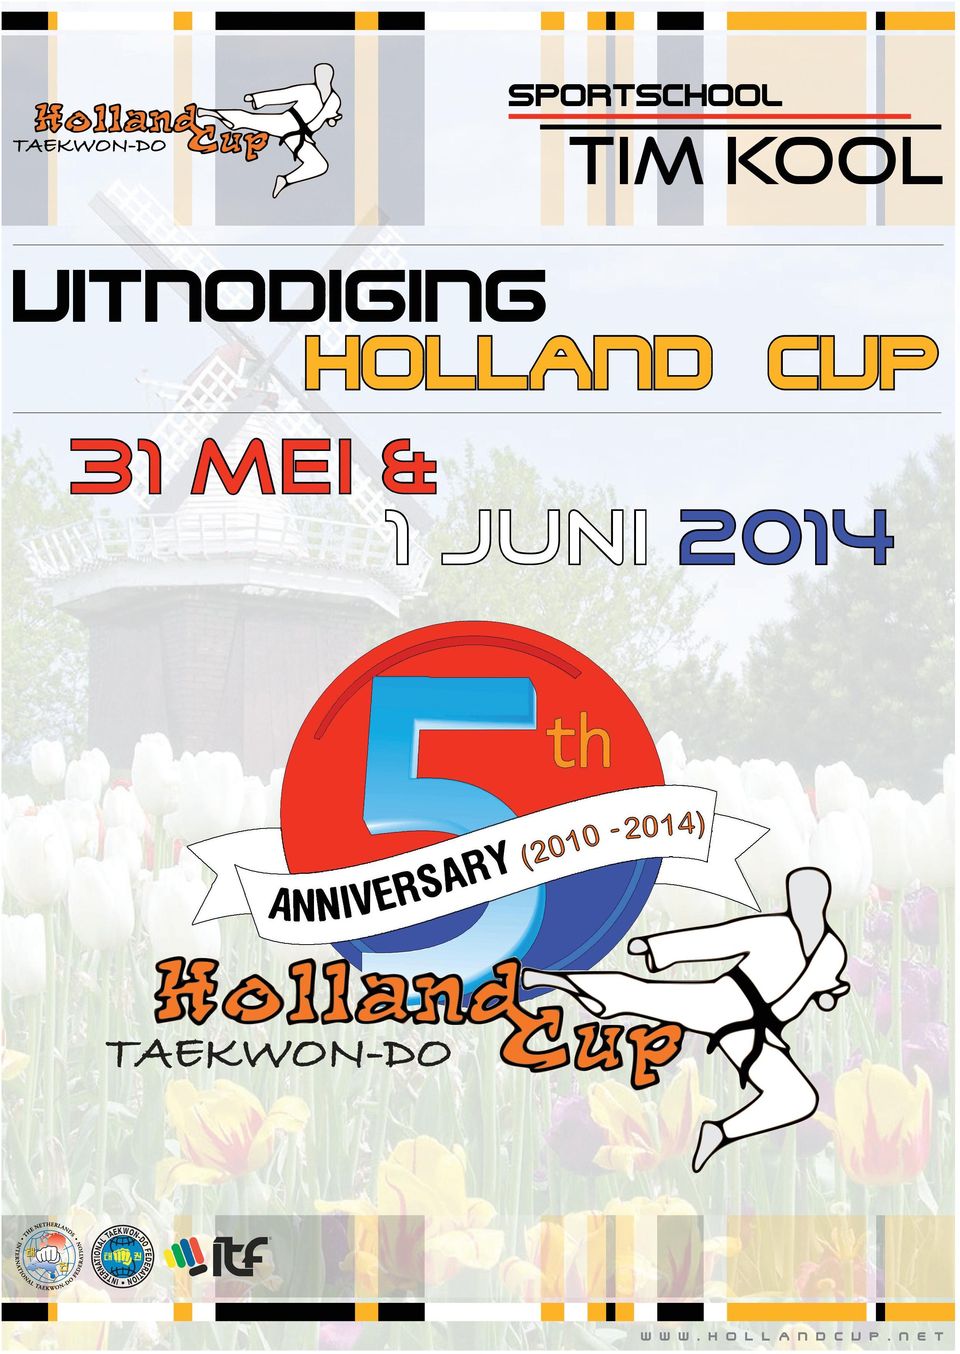 HOLLAND CUP